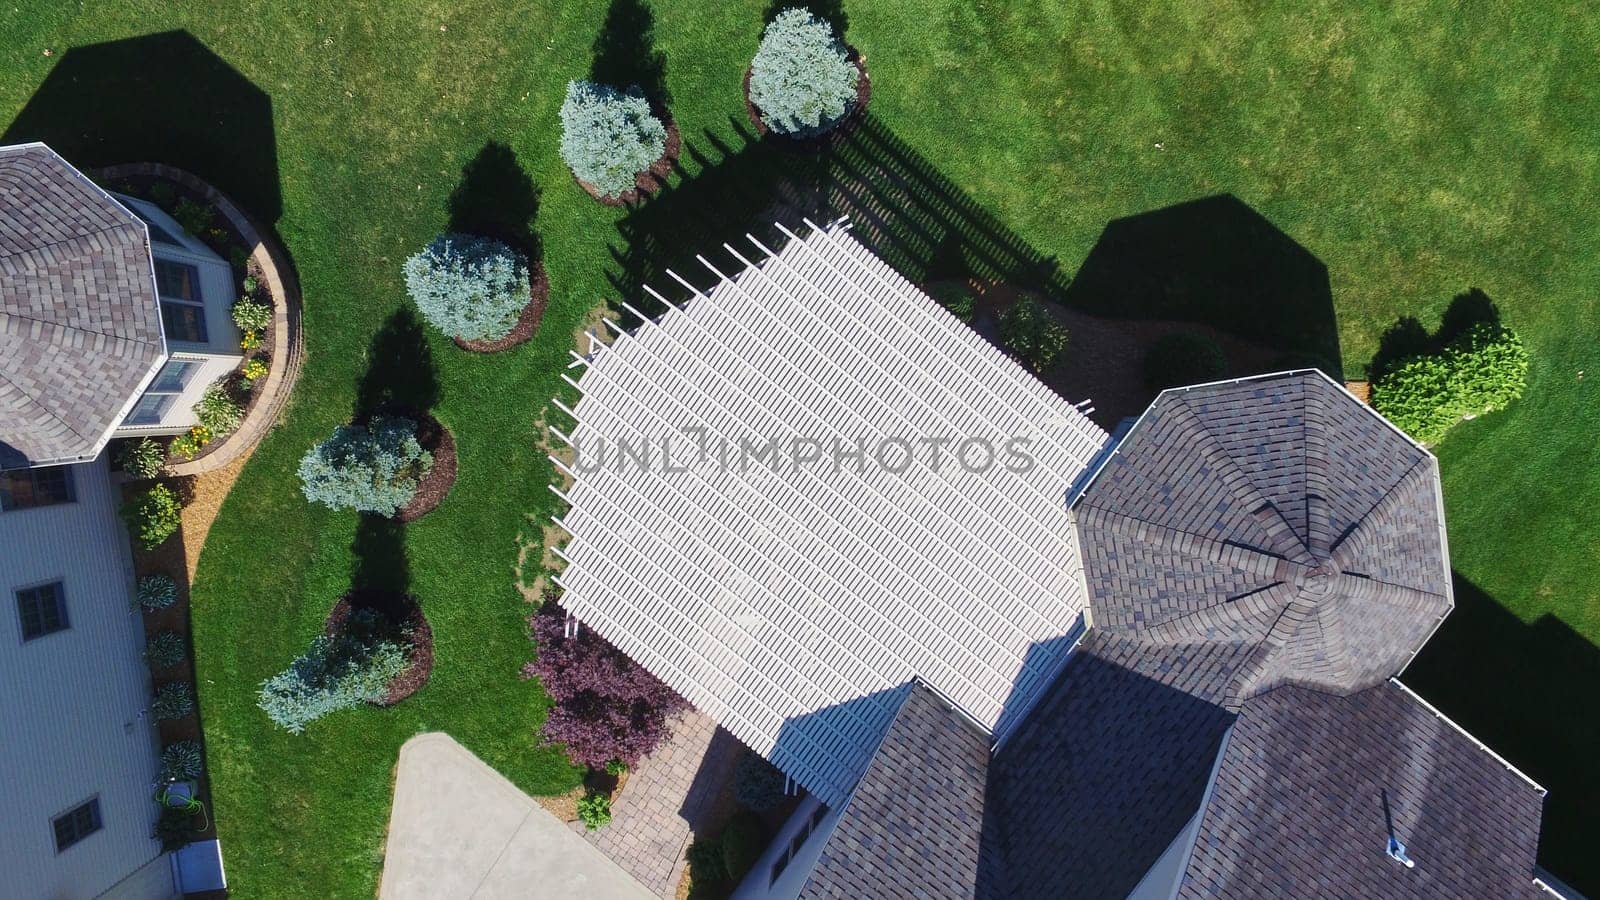 Aerial View of Idyllic Suburban Neighborhood in Fort Wayne, Indiana - Pristine Houses and Manicured Landscapes